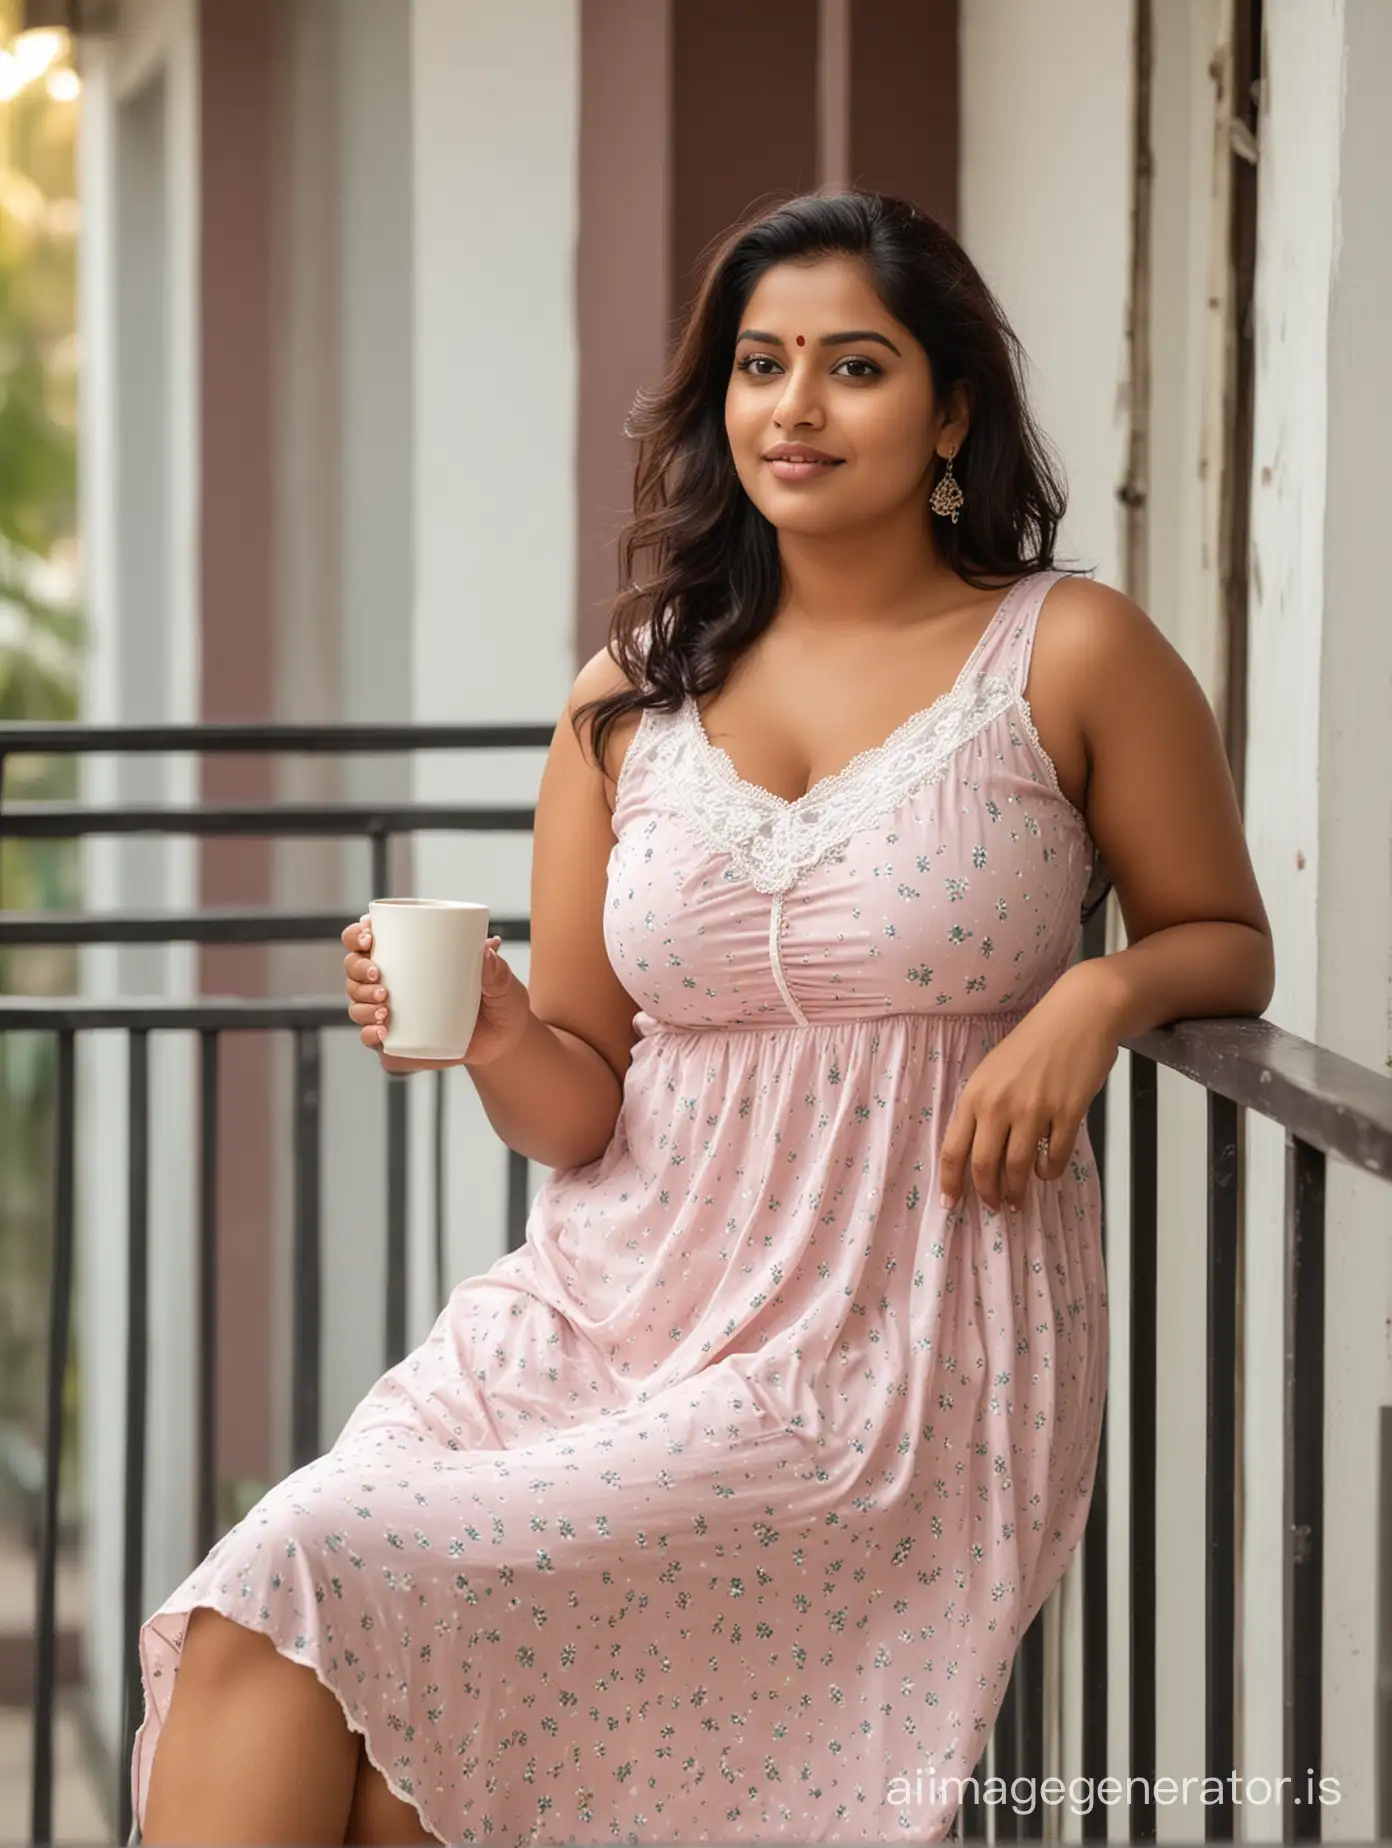 Beautiful indian plus size women wore sleeveless nighty sit in balcony with coffe cup